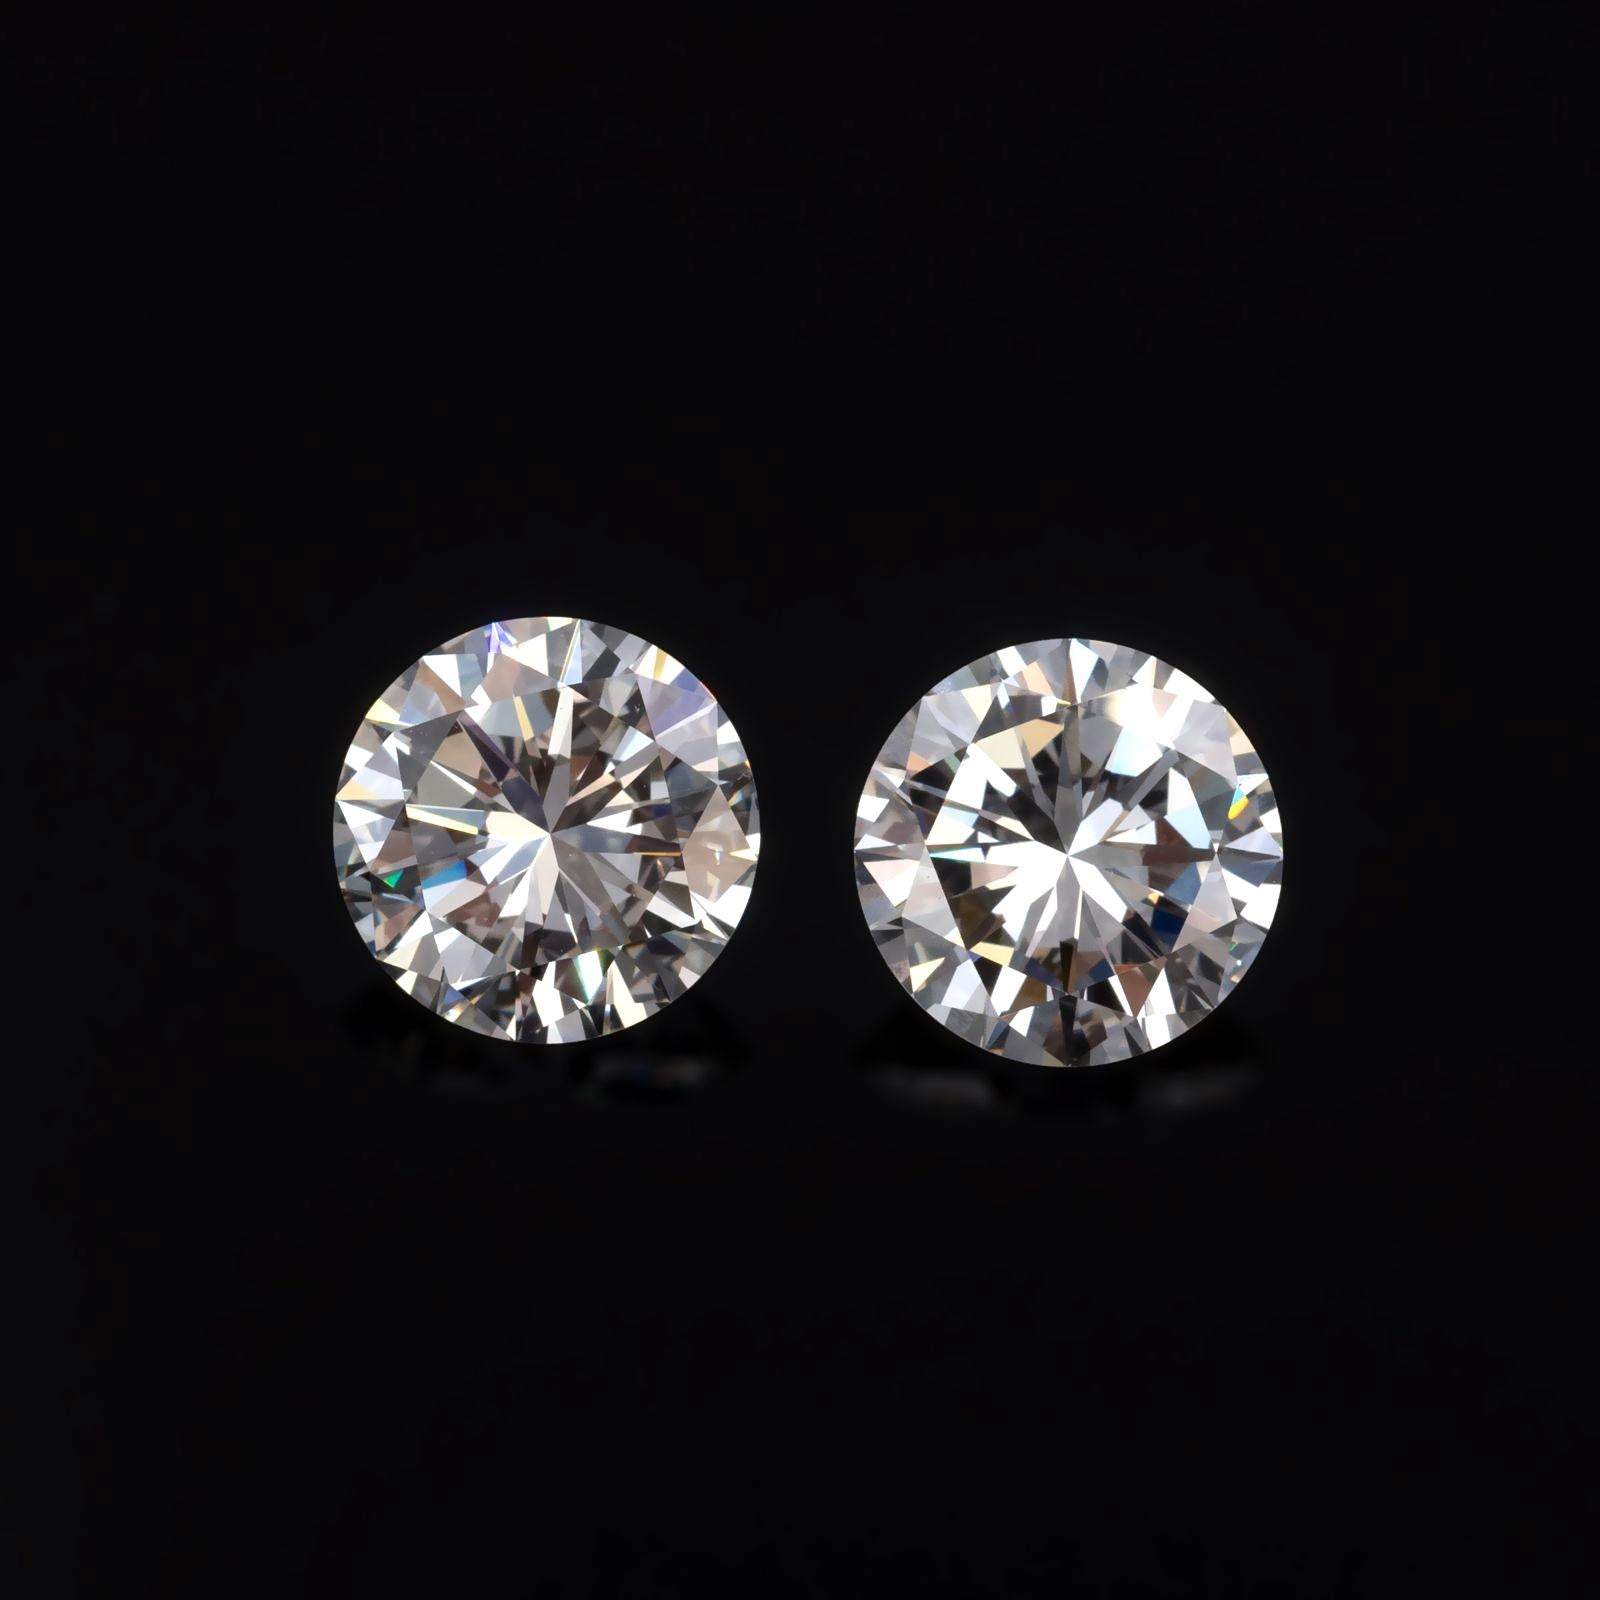 Beautifully large stud earrings: A very well-matched couple of diamonds weighing respectively 2.26 and 2.25 carat, both I VVS2, set on 18 Karat white gold stud earrings. The diamonds look incredibly white (more than the average I color ) and